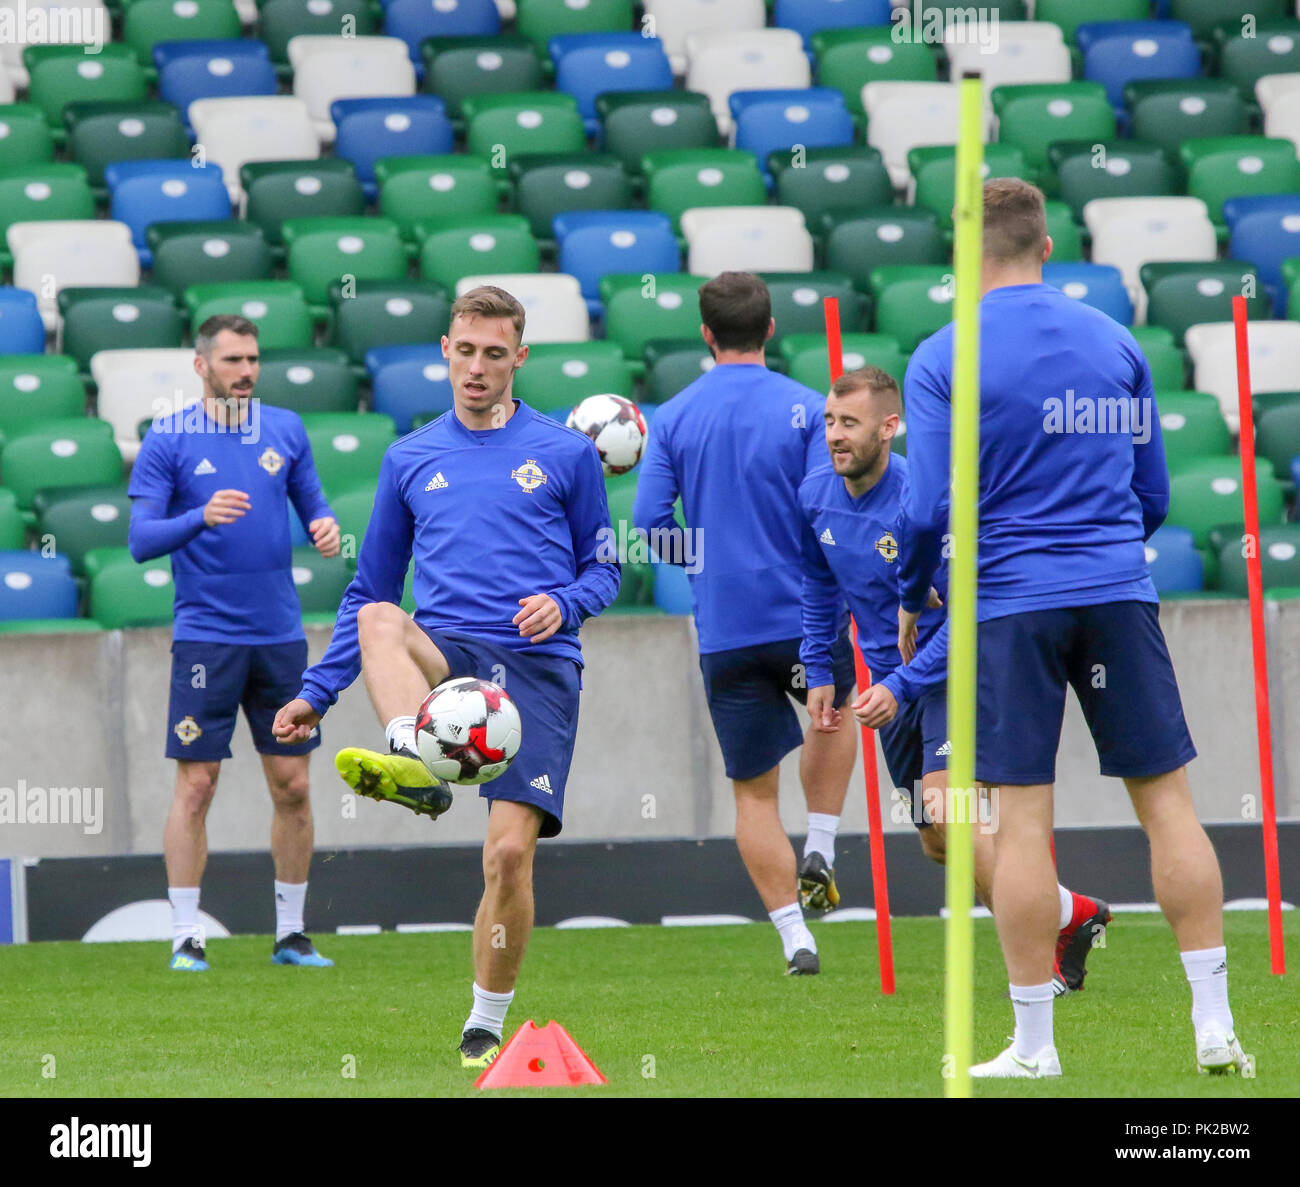 Windsor Park, Belfast, Northern Ireland. 10 September 2018. After Saturday's defeat in the UEFA Nations League, Northern Ireland returned to training this morning at Windsor Park. Tomorrow night they play Israel in a friendly international. Gavin Whyte on the ball. Credit: David Hunter/Alamy Live News. Stock Photo